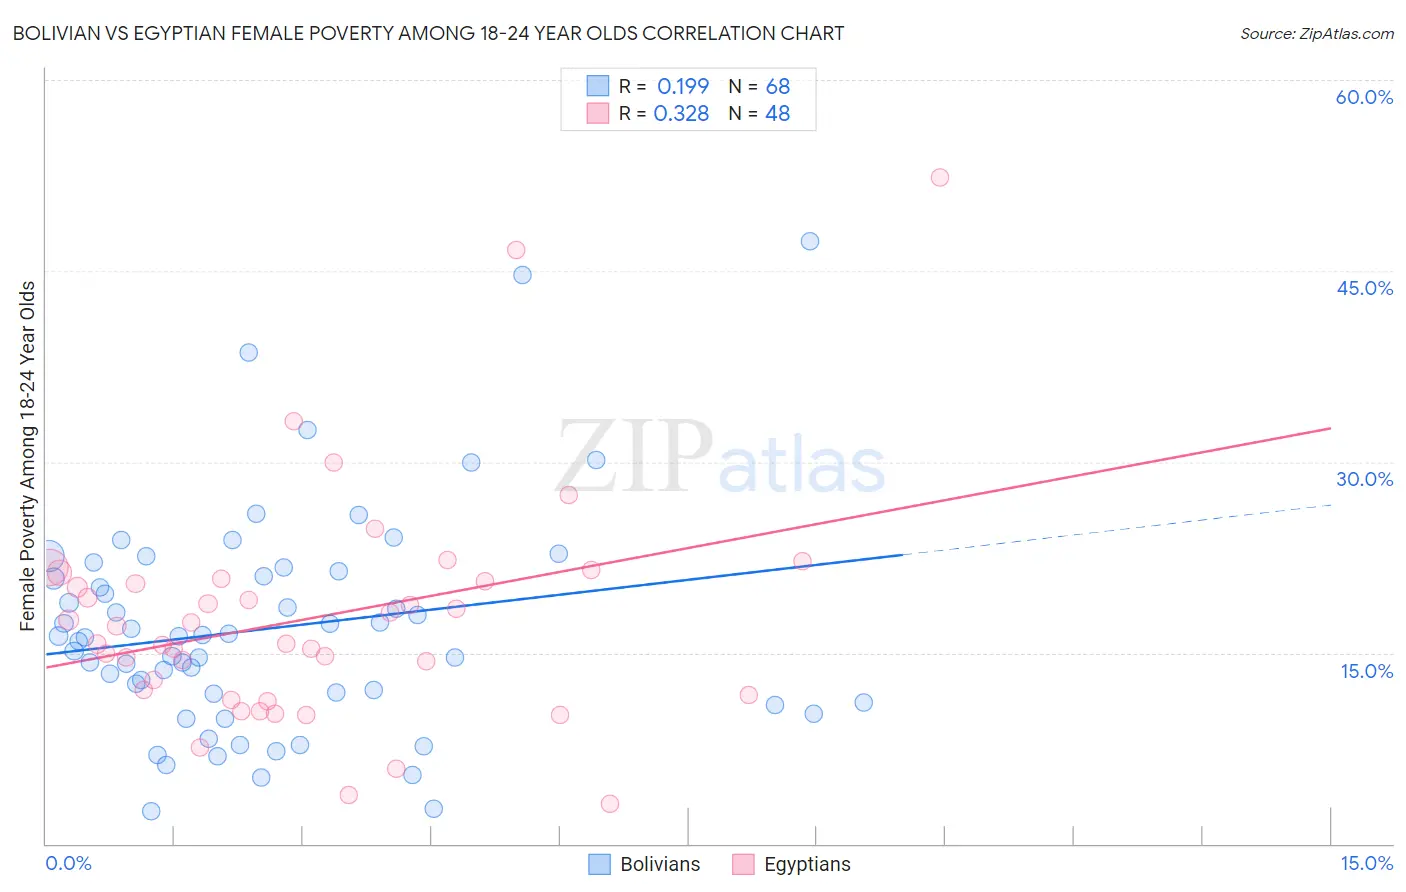 Bolivian vs Egyptian Female Poverty Among 18-24 Year Olds